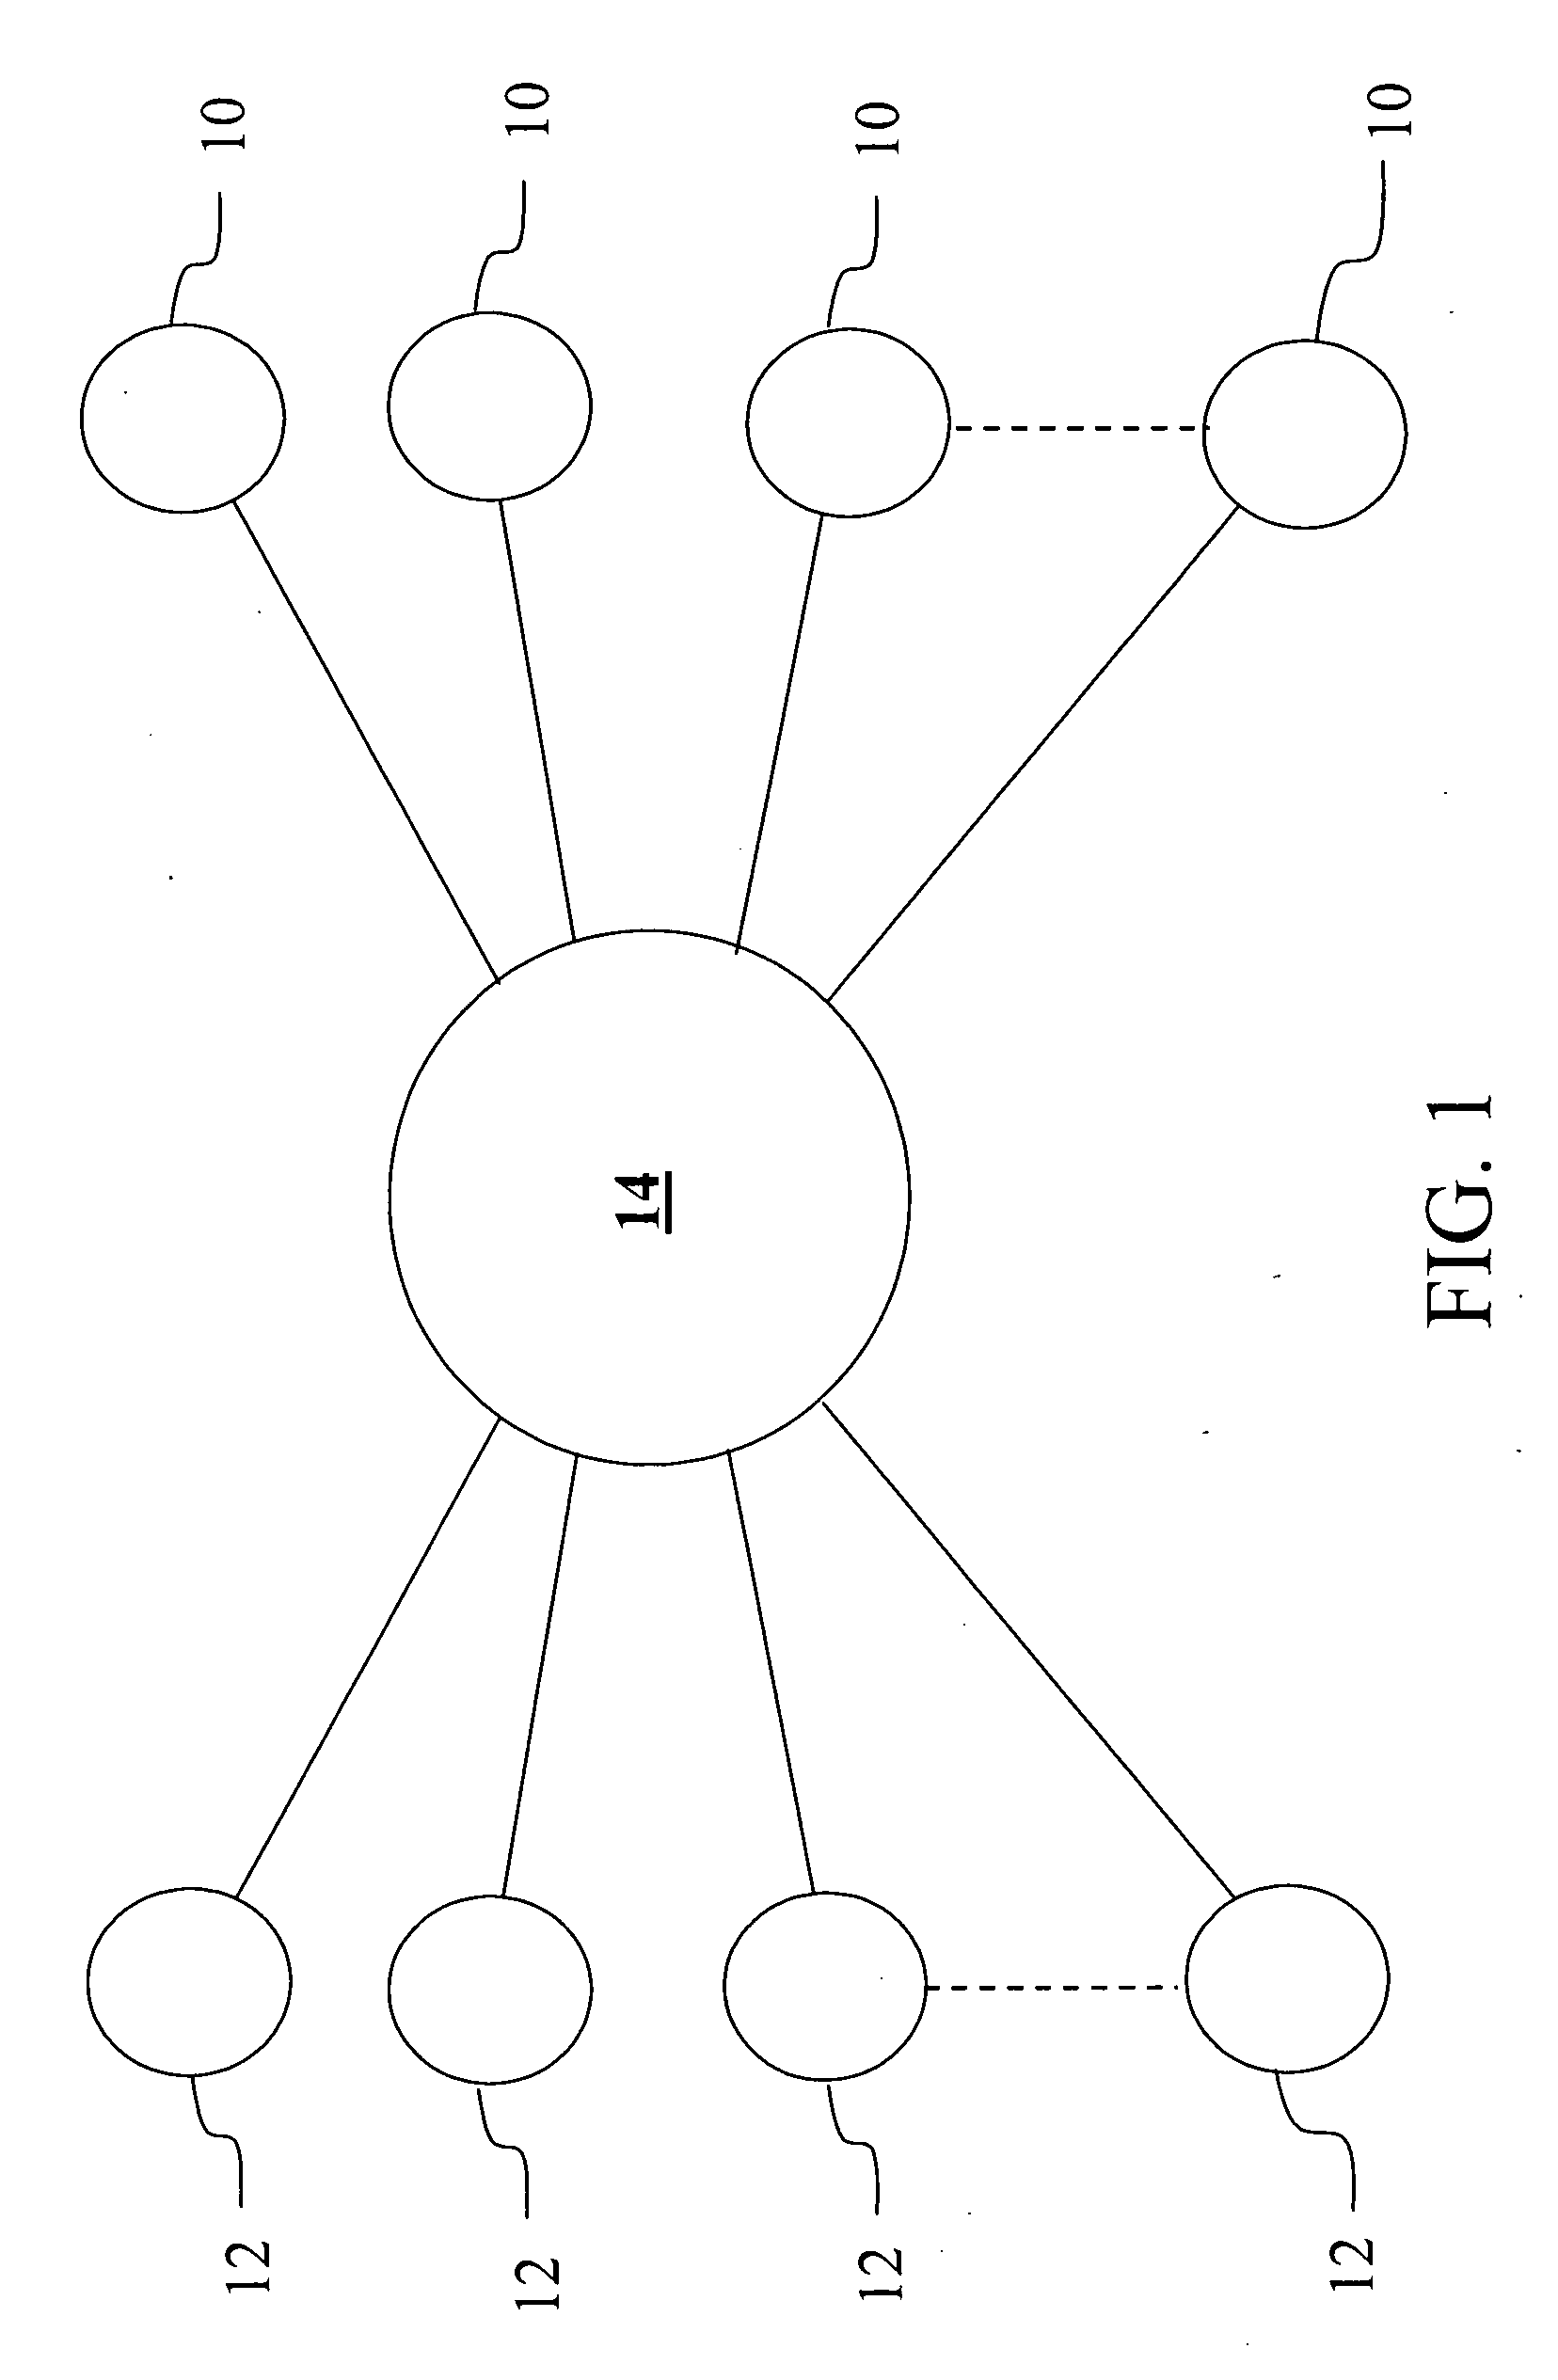 System and method for auctioning services over an information exchange network